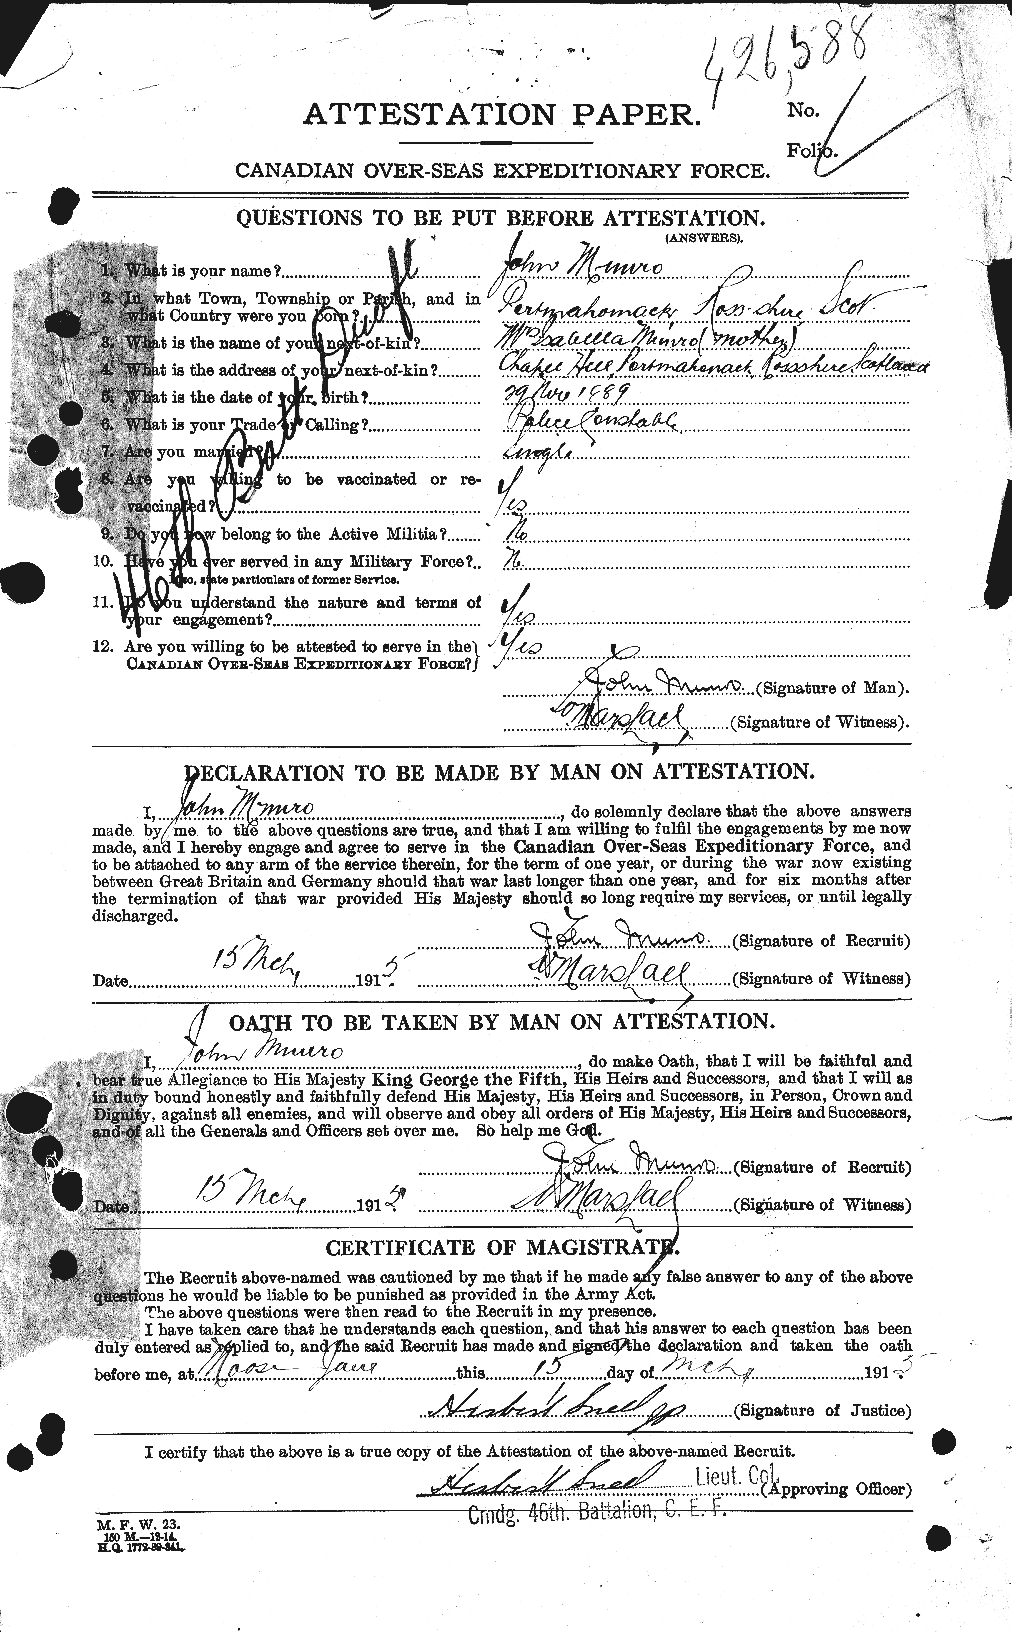 Personnel Records of the First World War - CEF 513927a